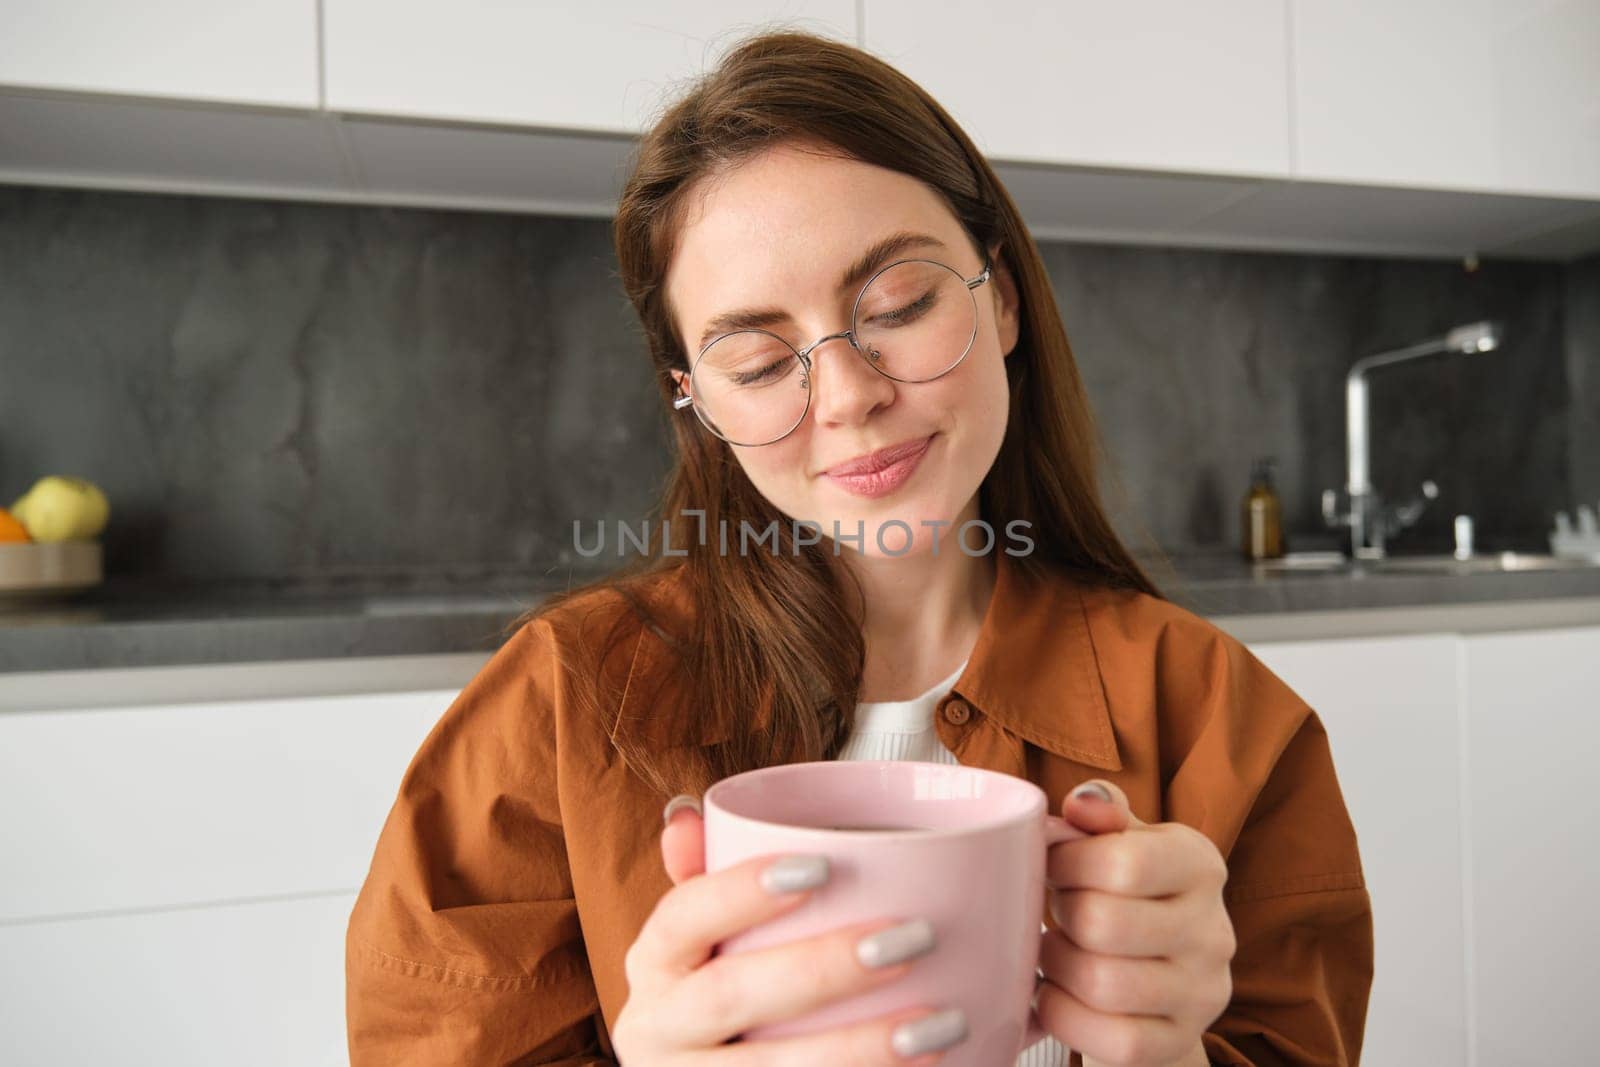 Portrait of cute, lovely young woman in glasses, sitting in kitchen, holding mug, drinking delicious tea.